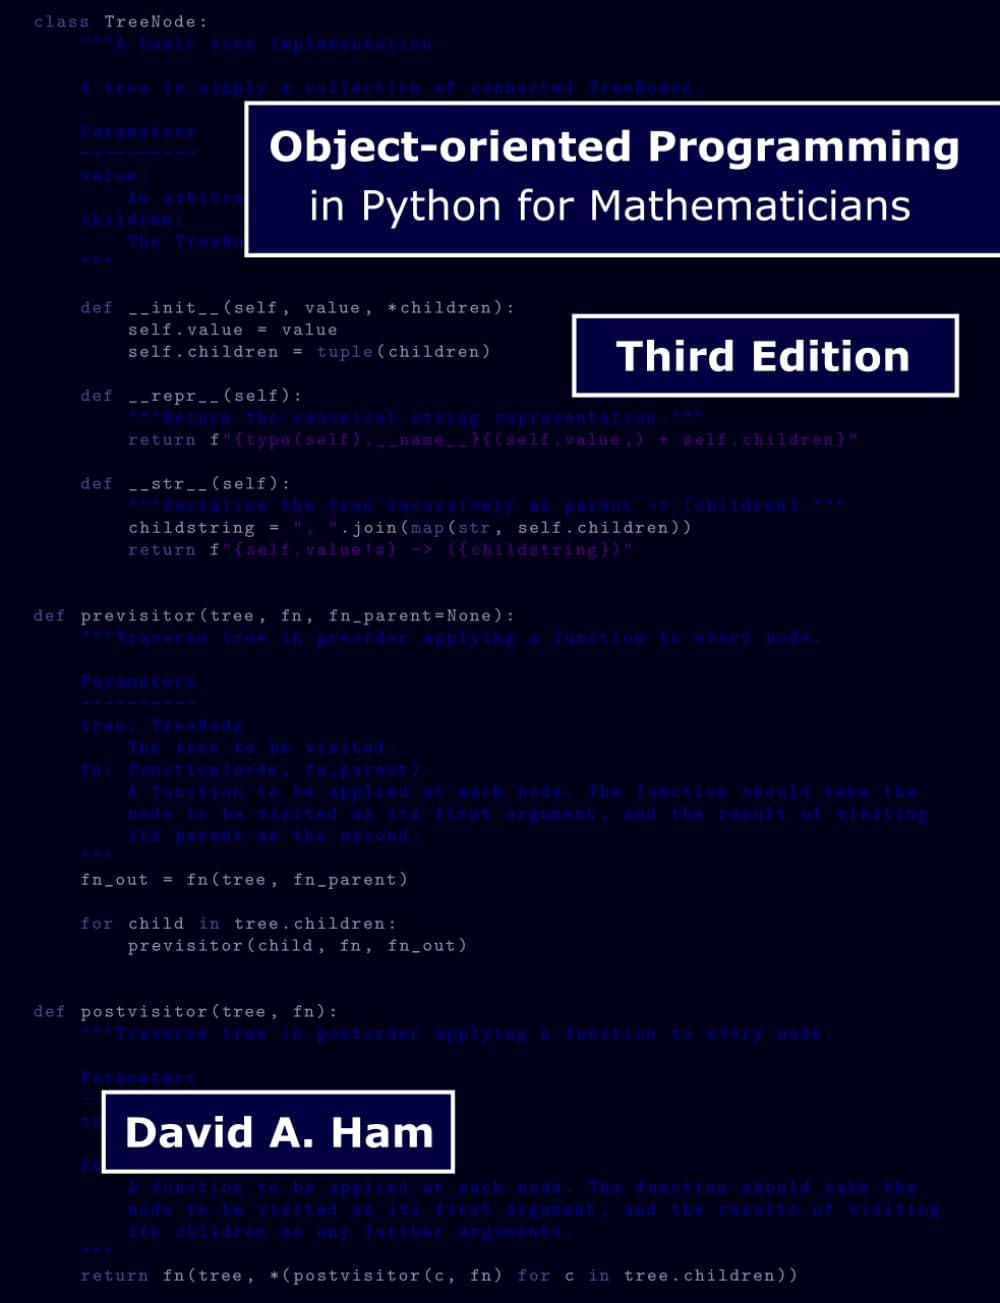 object oriented programming in python for mathematicians 3rd edition david a. ham b0cjxlfdfd, 979-8862577501